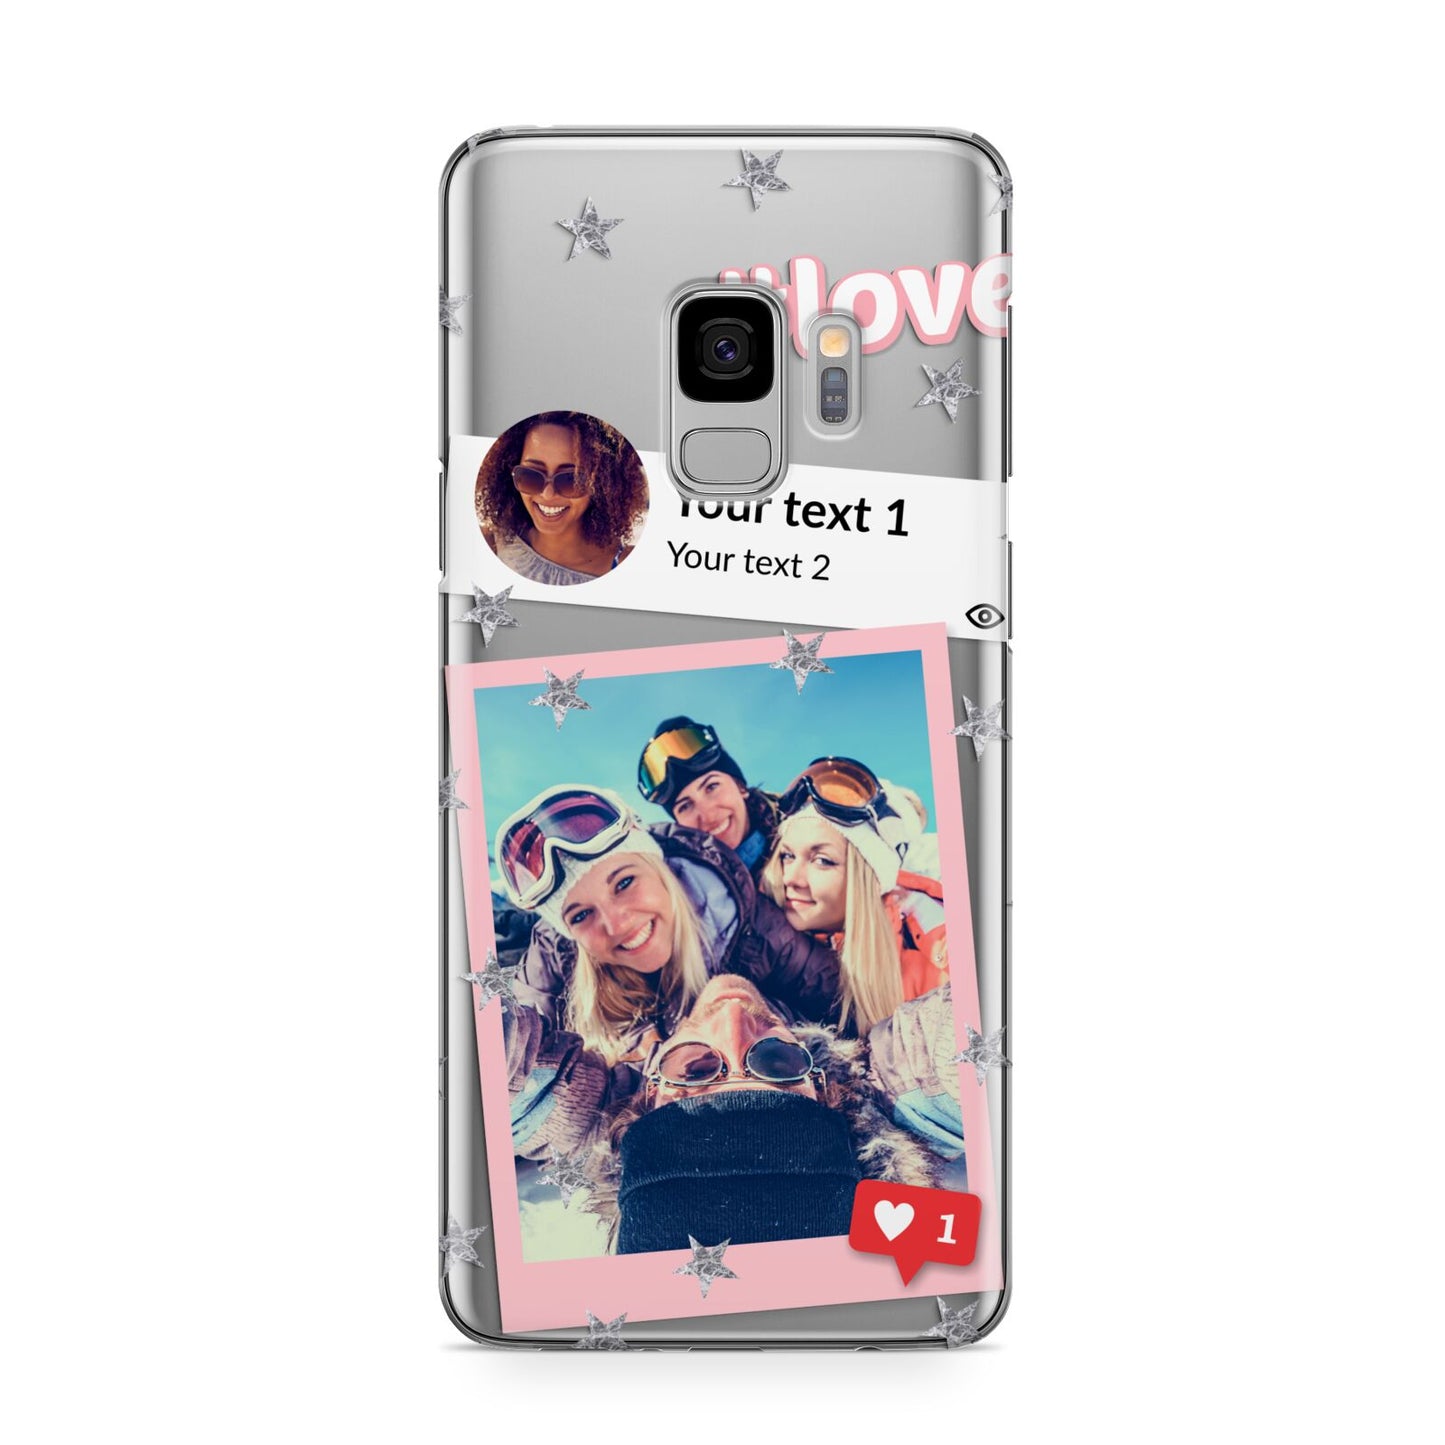 Starry Social Media Photo Montage Upload with Text Samsung Galaxy S9 Case